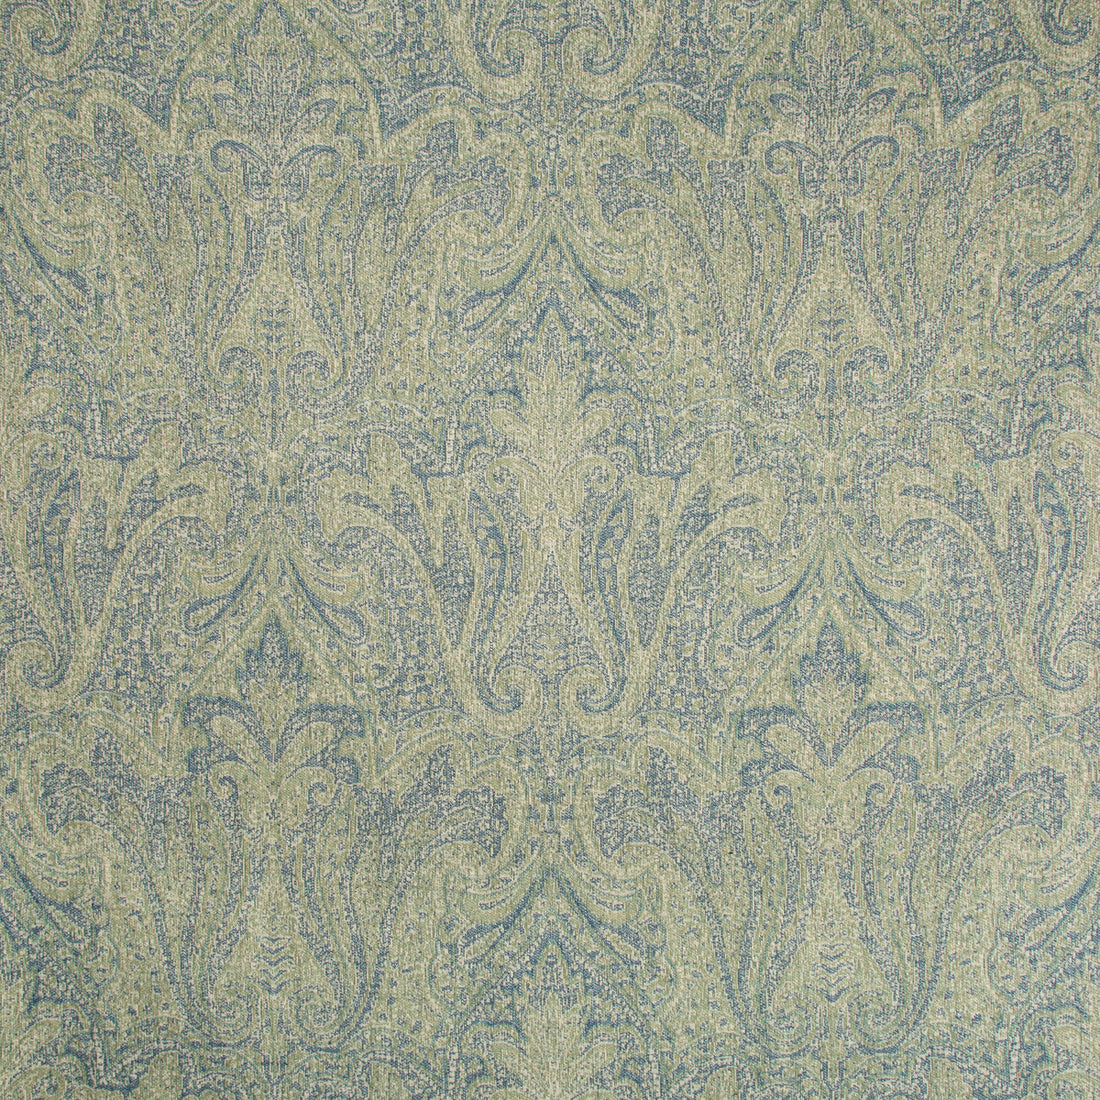 Toccoa Paisley fabric in jade/navy color - pattern 2017126.503.0 - by Lee Jofa in the Lodge II Weaves And Embroideries collection